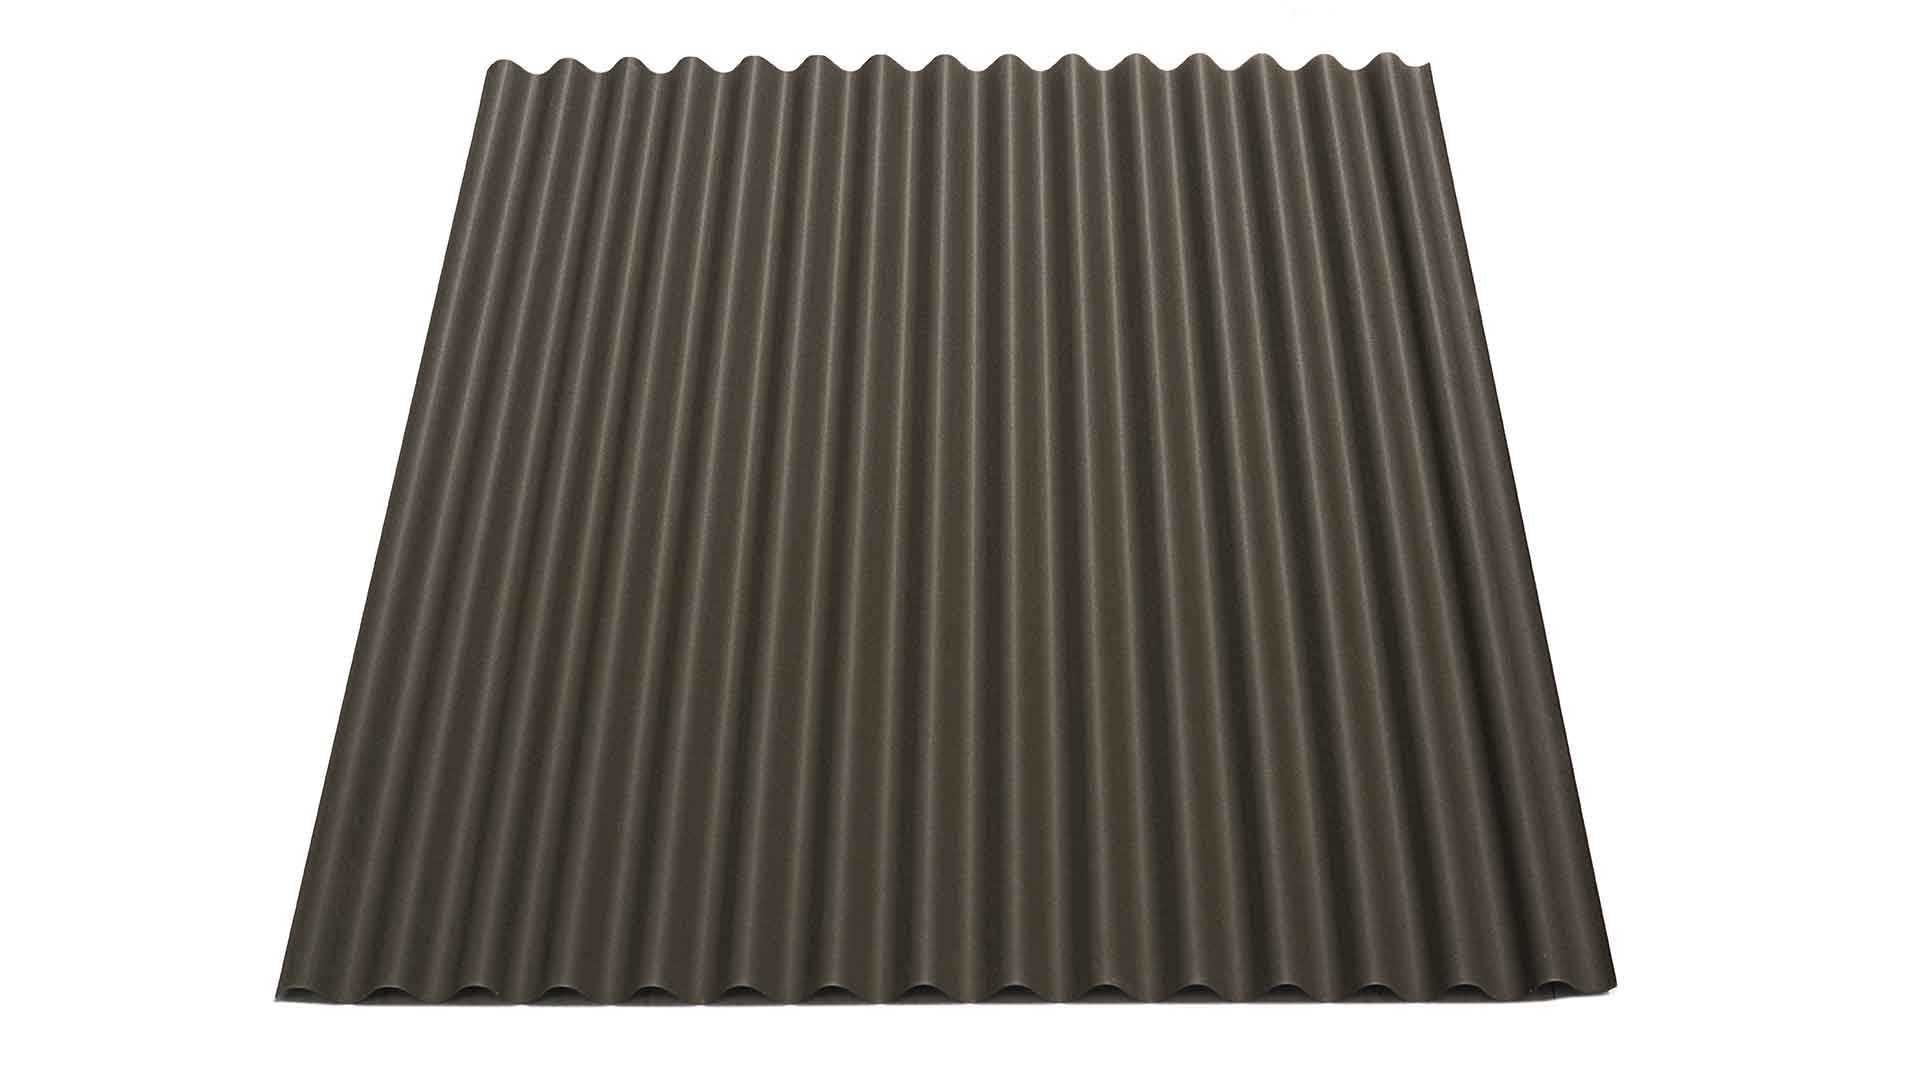 https://6069238.fs1.hubspotusercontent-na1.net/hubfs/6069238/images/products/steelscape/steelscape-natural-matte-ore=corrugated.jpg